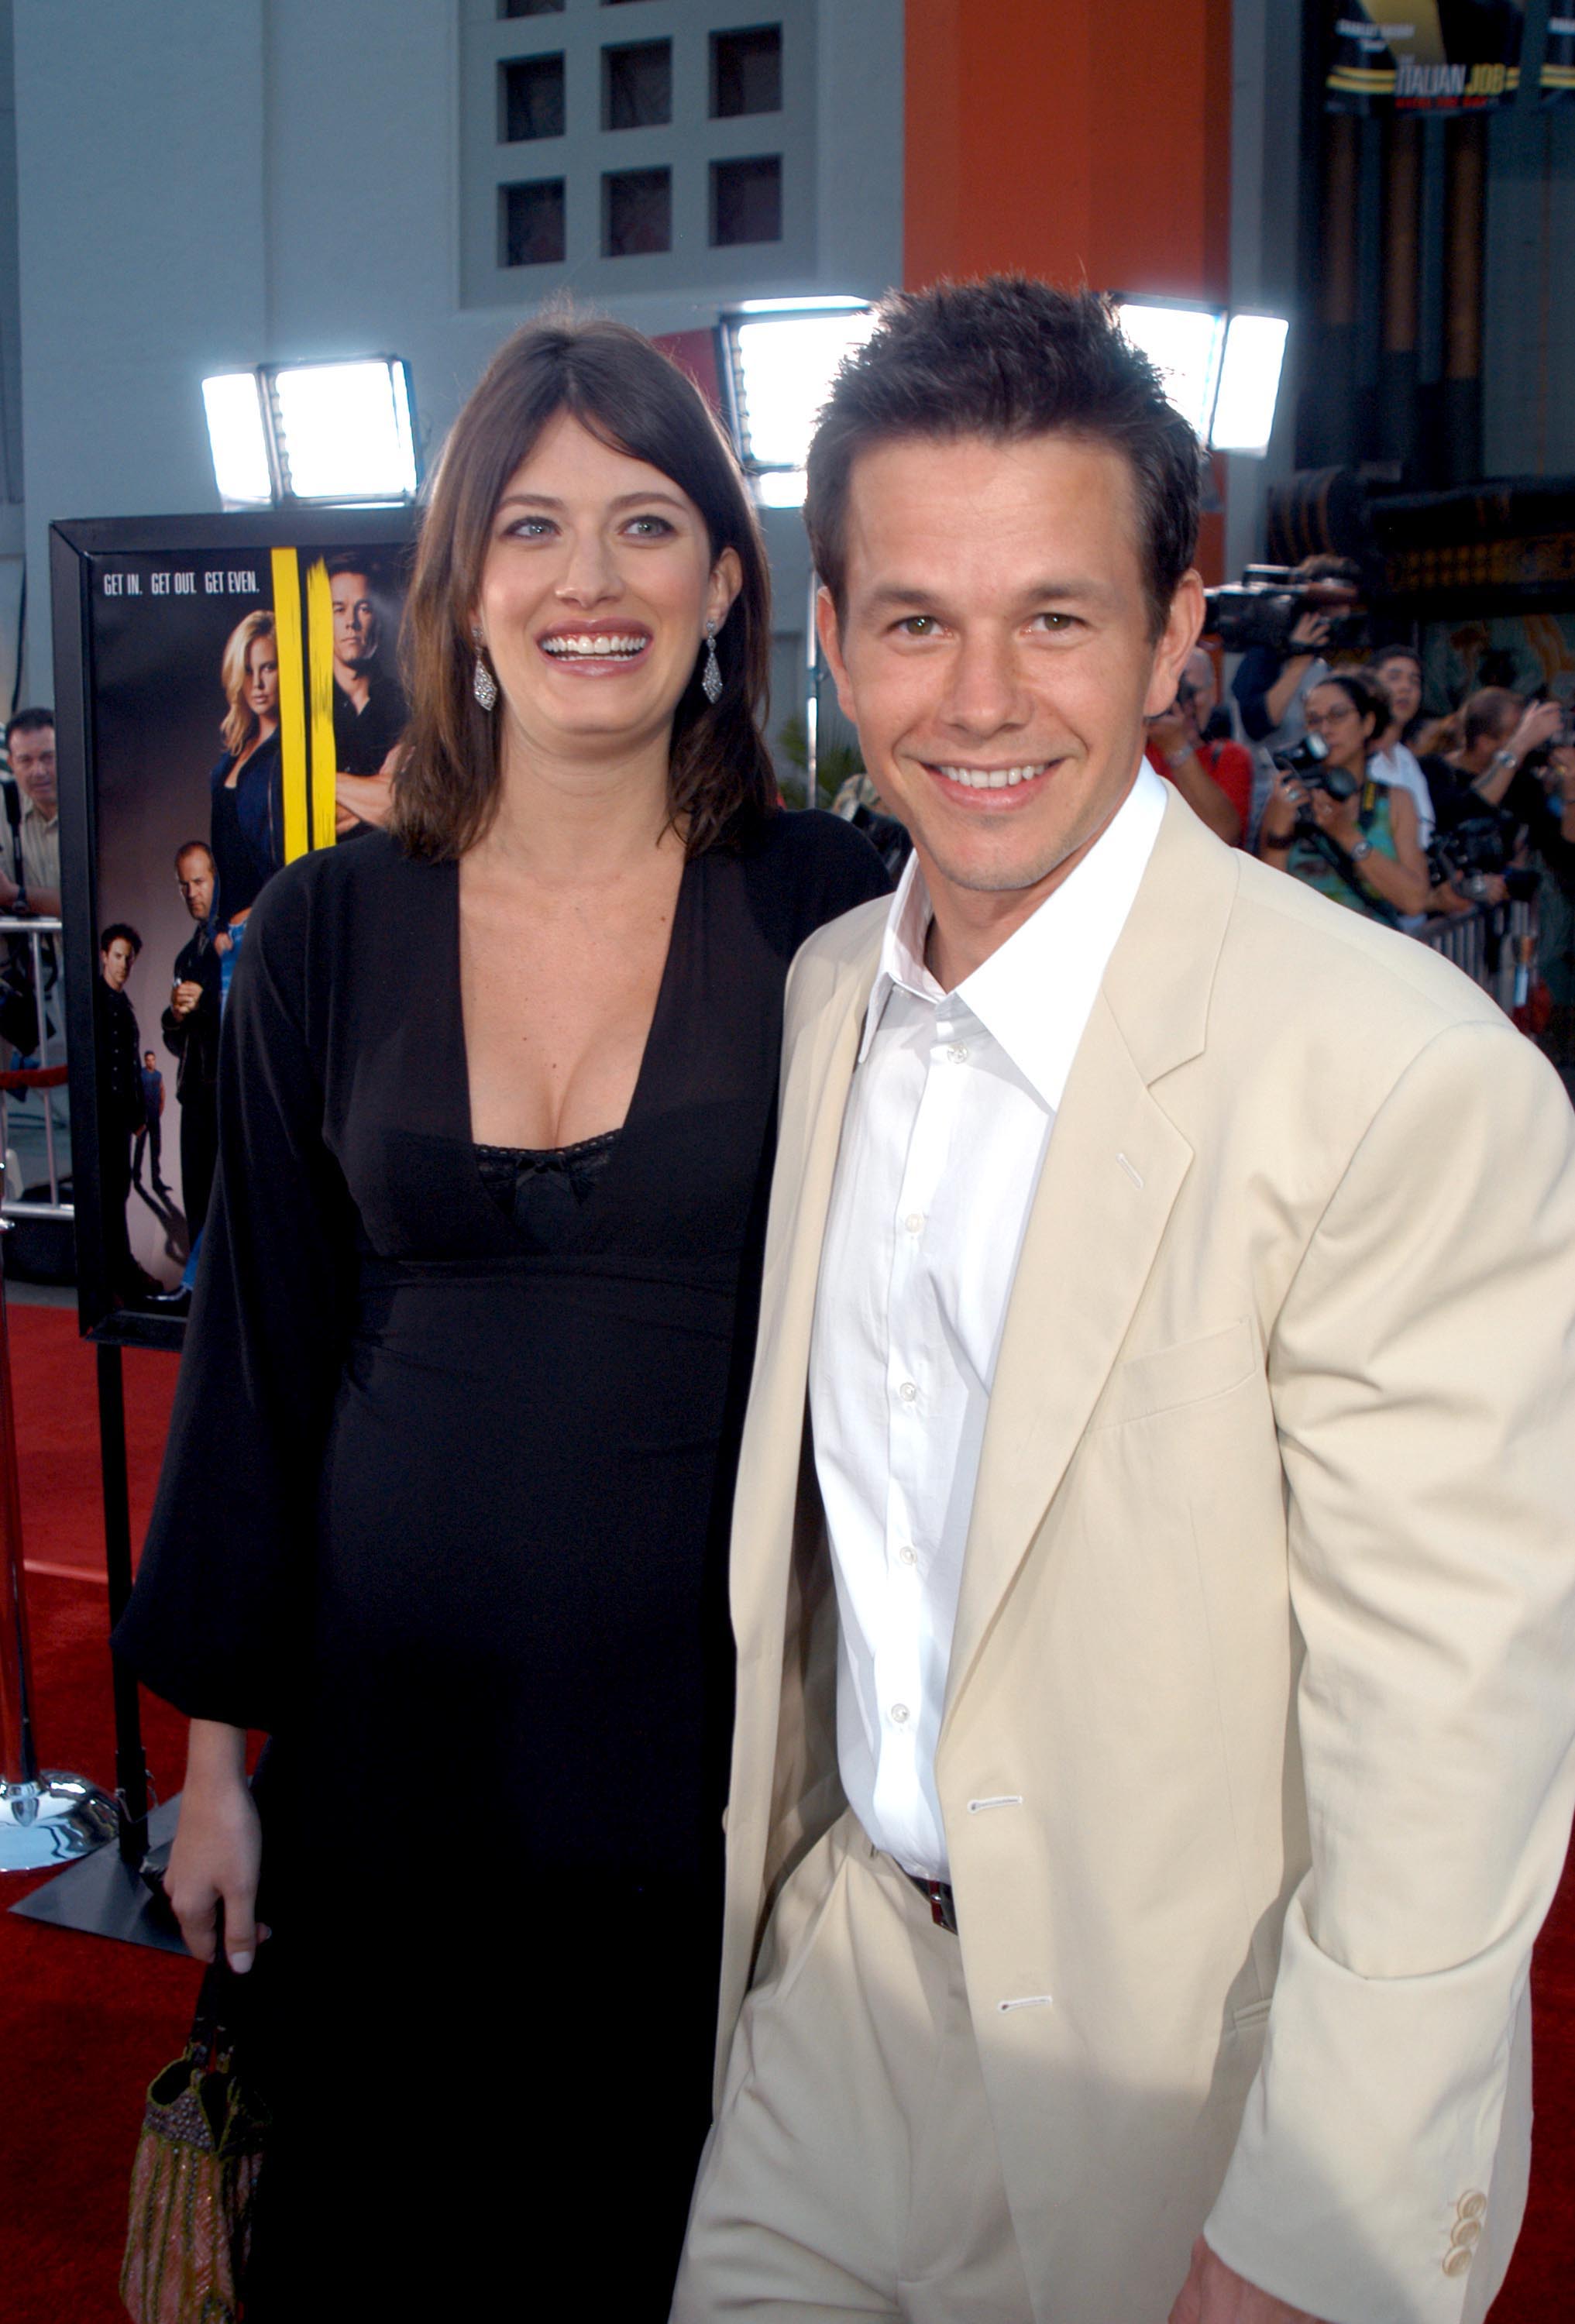 Former model Rhea Durham and Mark Wahlberg during "The Italian Job" movie premiere at Mann's Chinese Theater in Hollywood, California. / Source: Getty Images